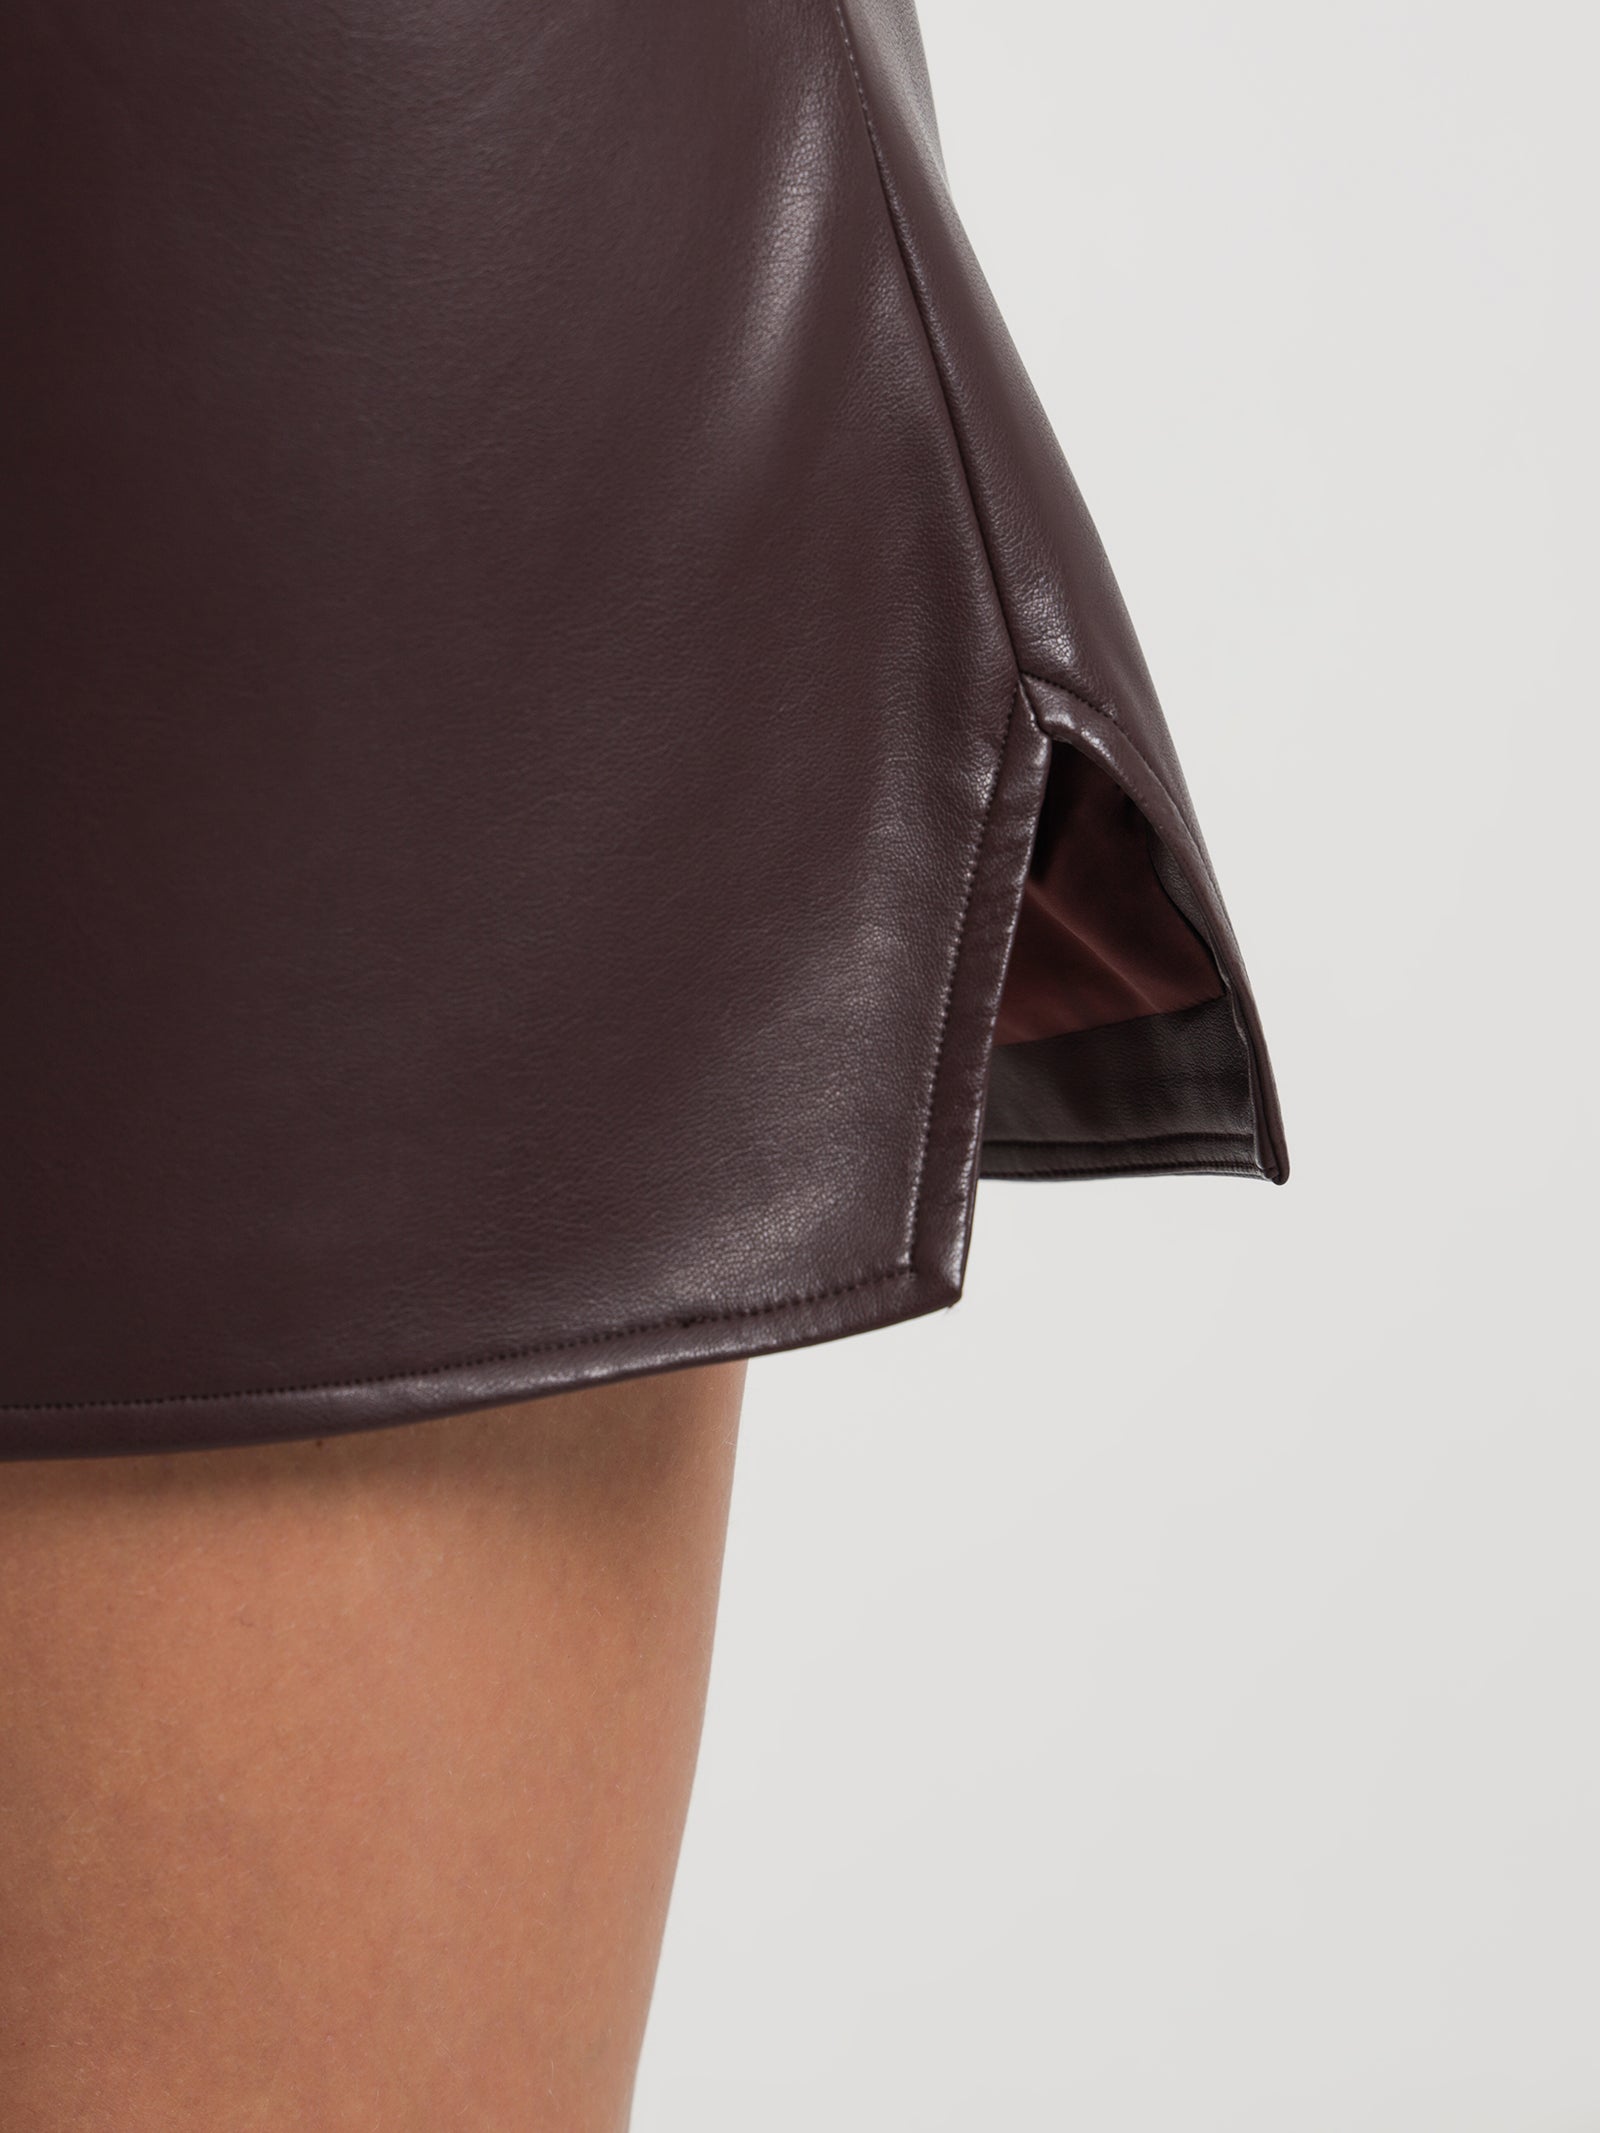 Jax Faux Leather Skirt in Hickory